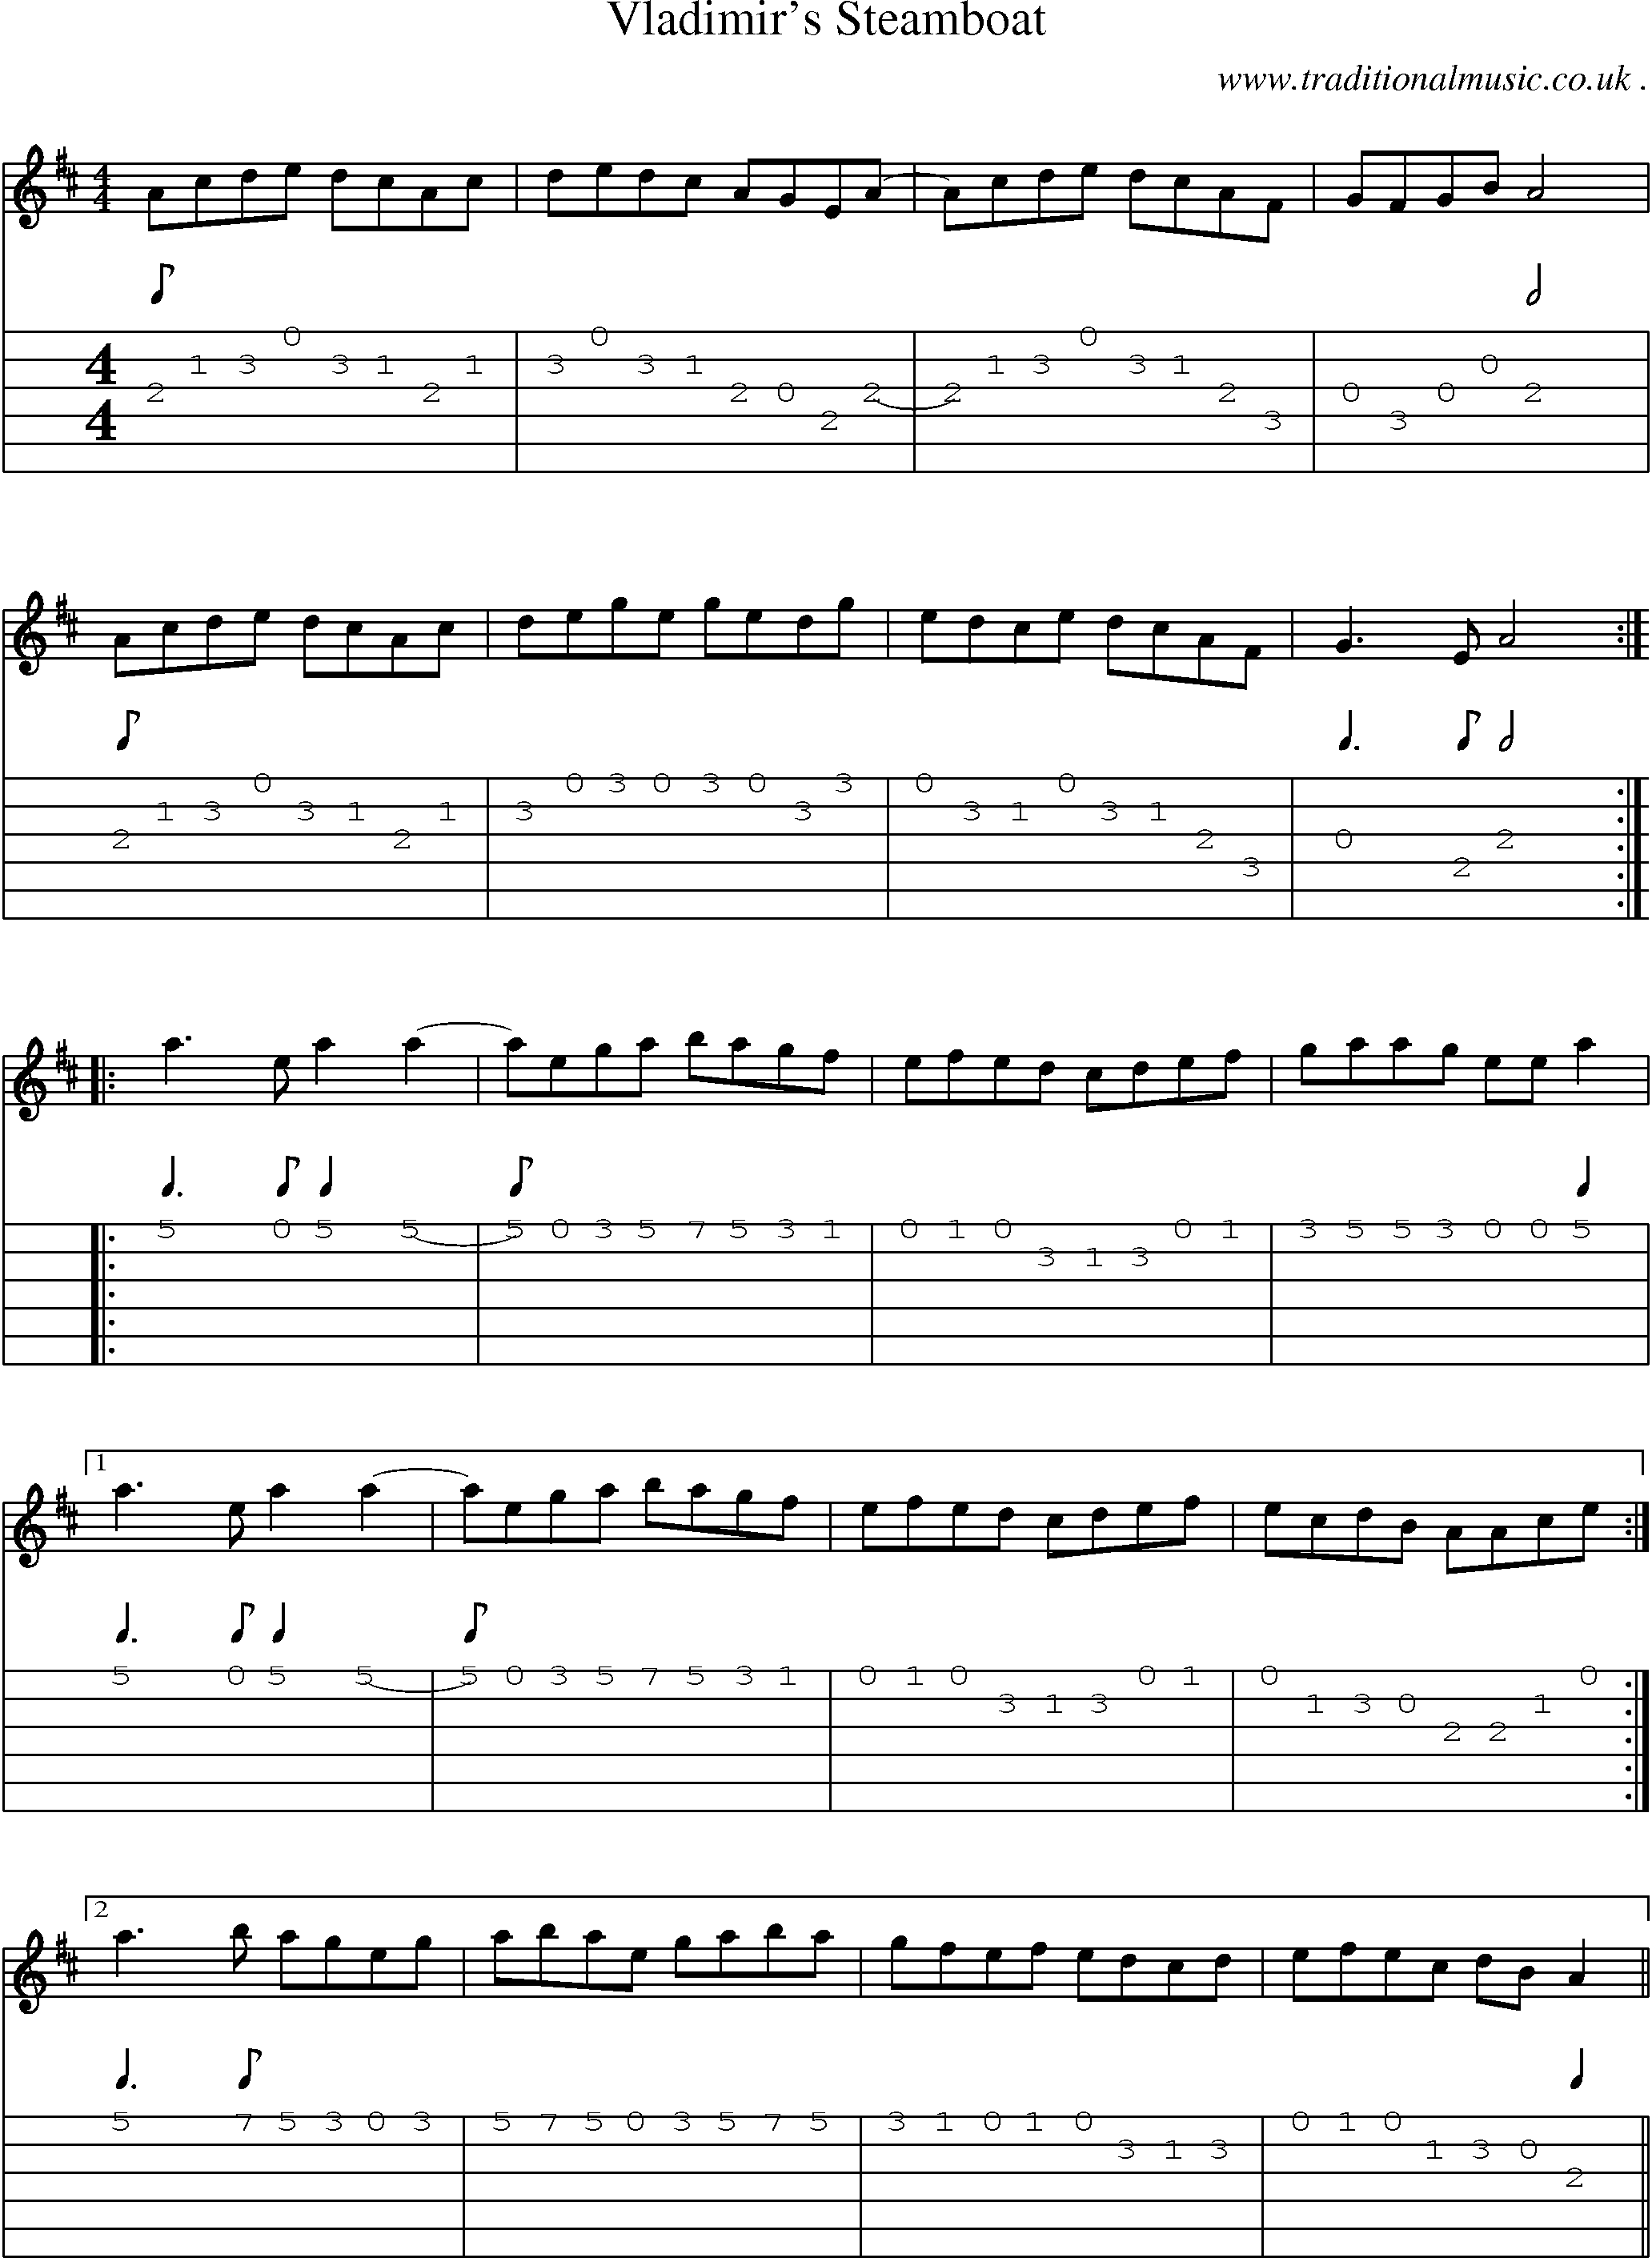 Sheet-Music and Guitar Tabs for Vladimirs Steamboat